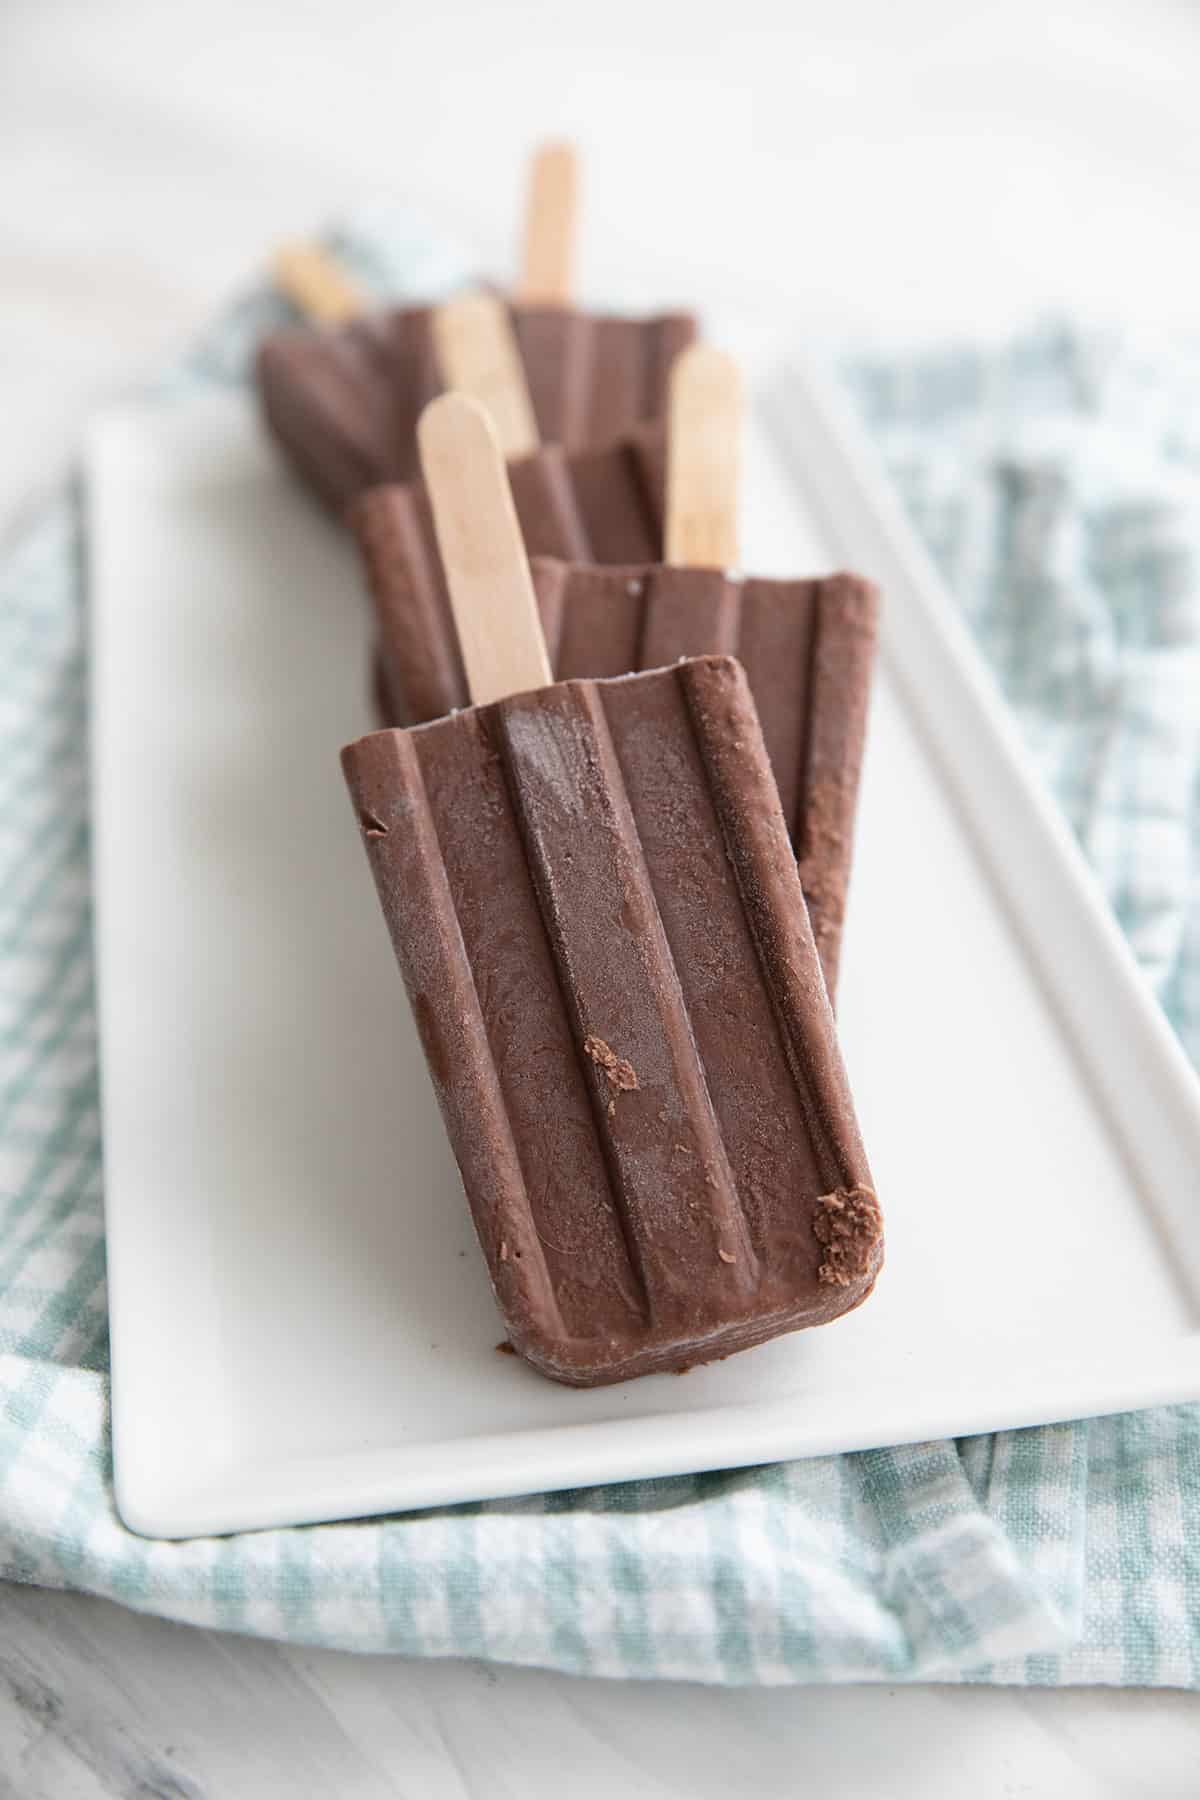 Keto chocolate popsicles lined up on a white tray.